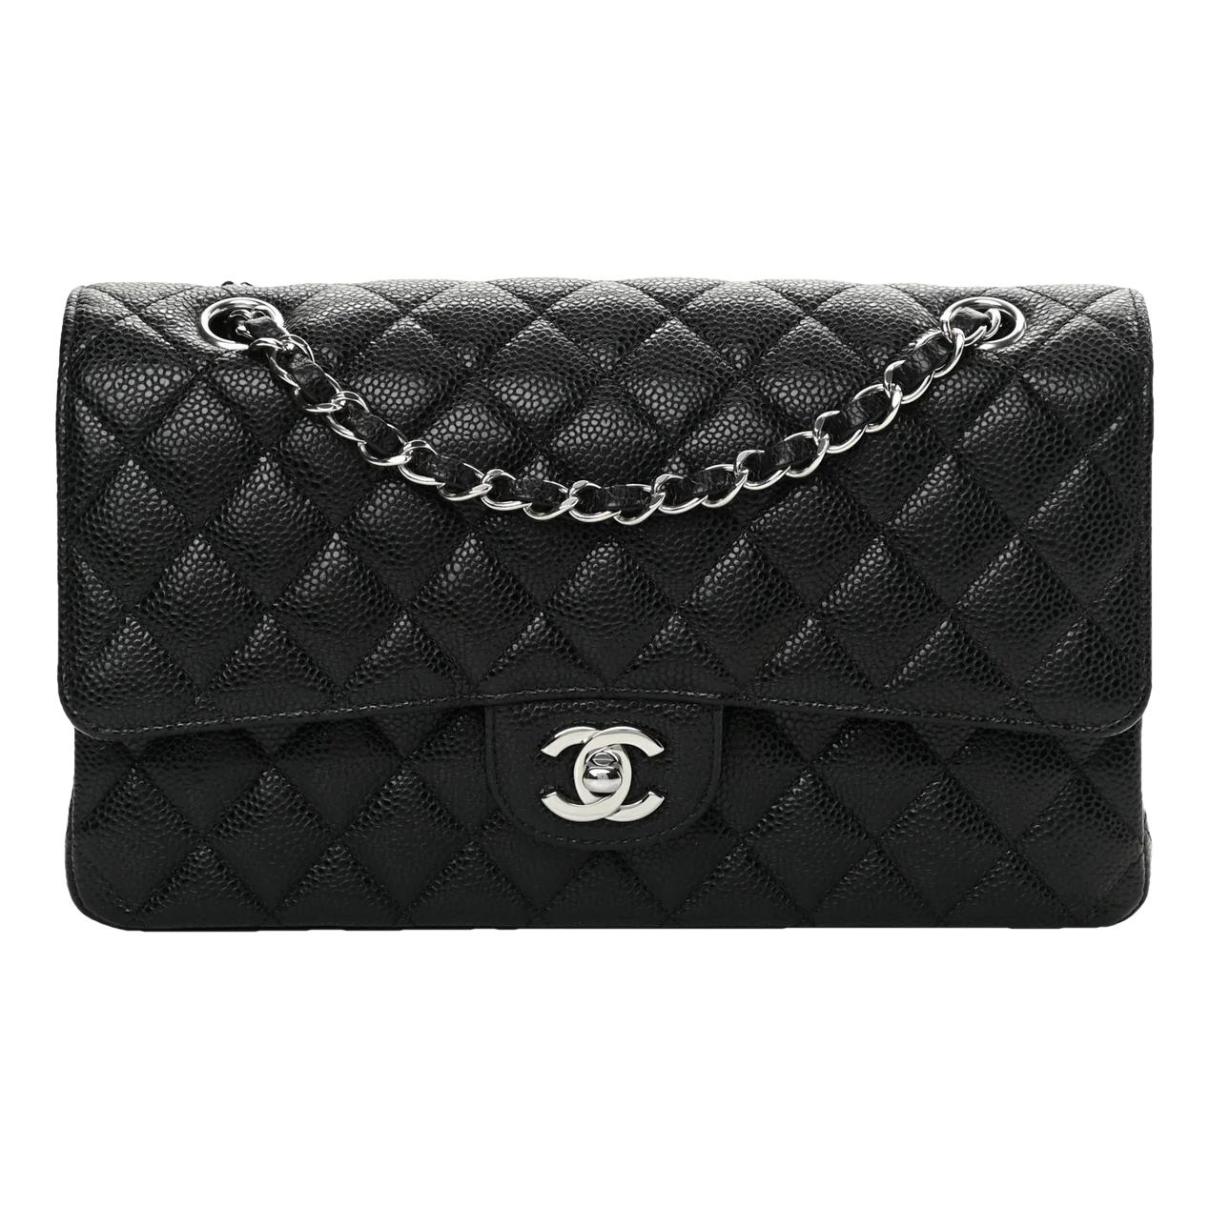 Timeless/classique leather handbag Chanel Black in Leather - 32960115